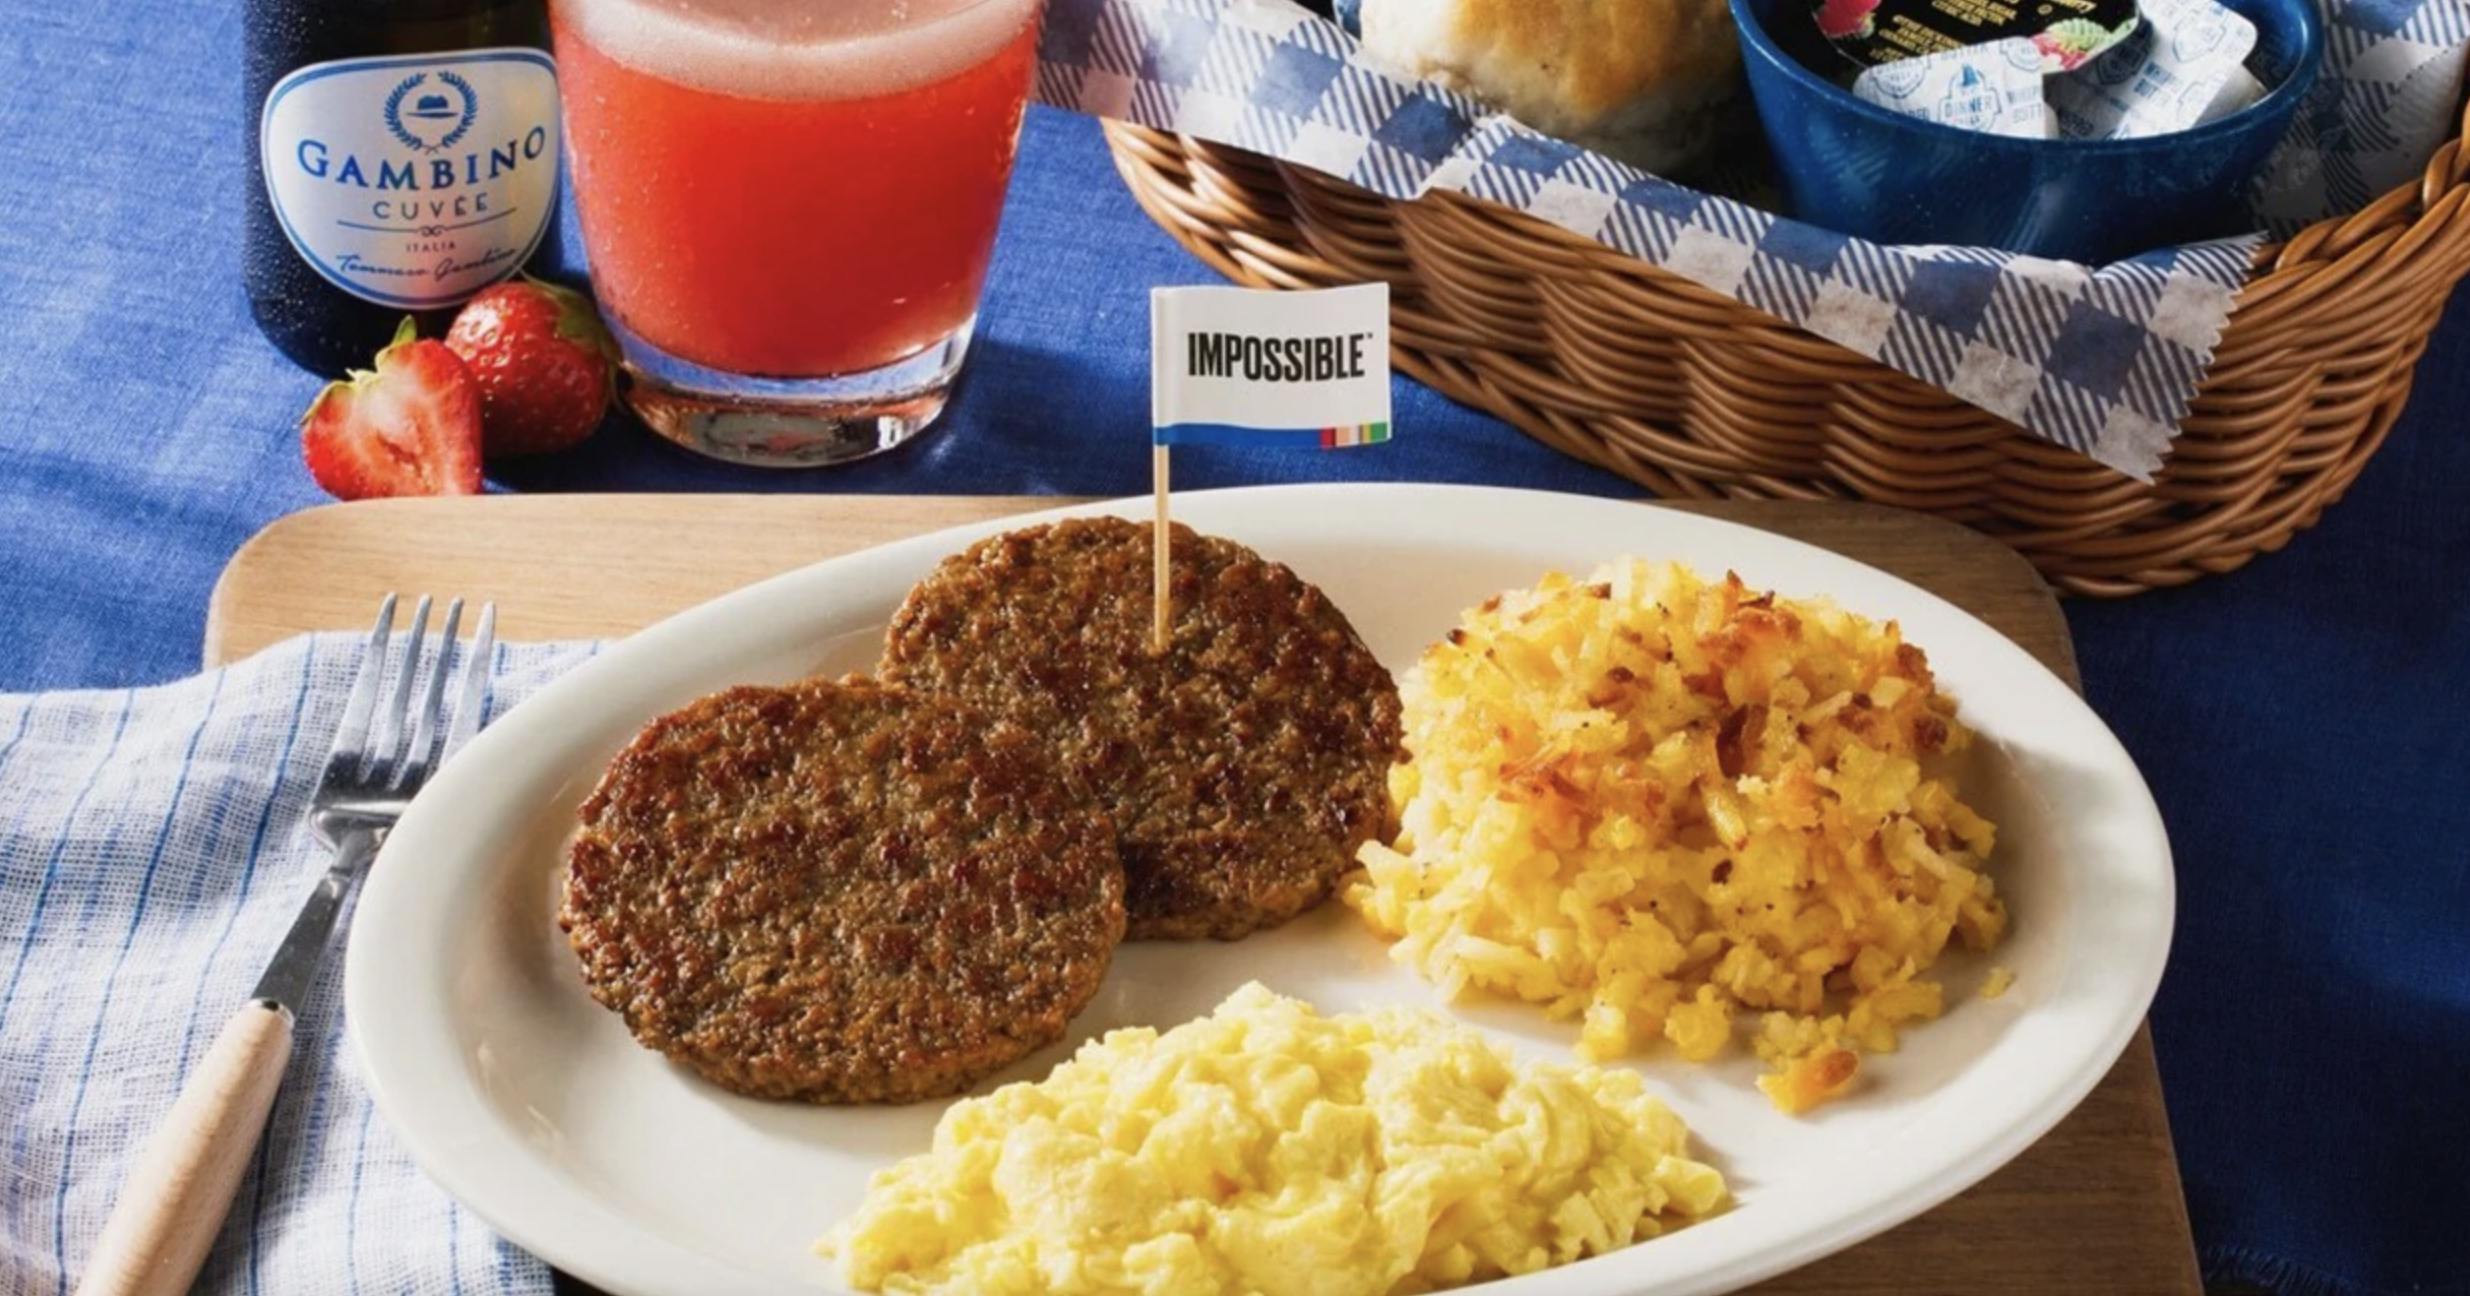 Cracker Barrel Posted About Its New Meatless Sausage, Causing Major Beef With Its ‘Customer Base’ – NBC Connecticut